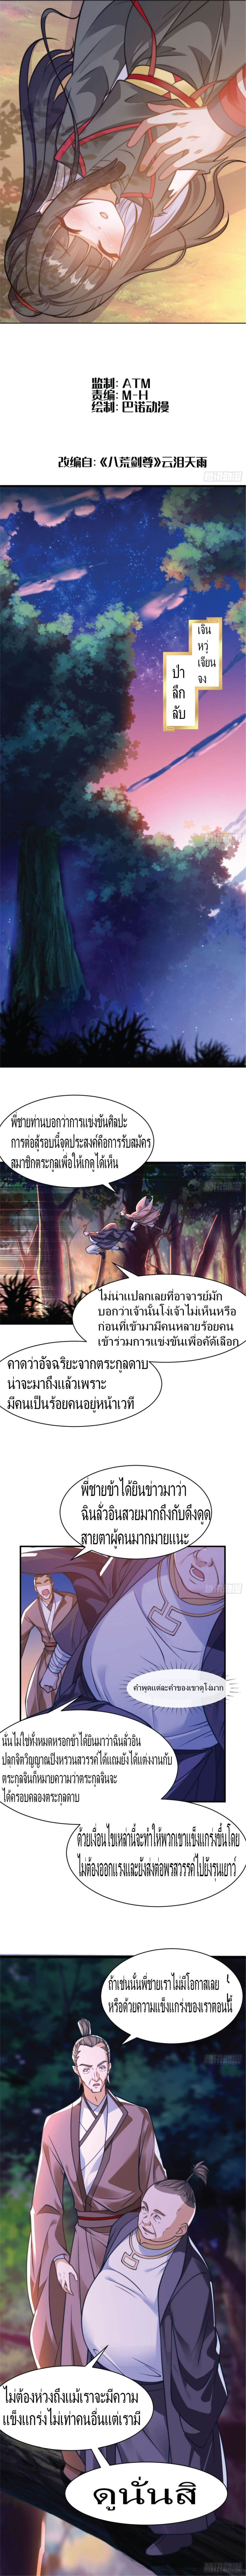 The Strongest Brother 6 แปลไทย